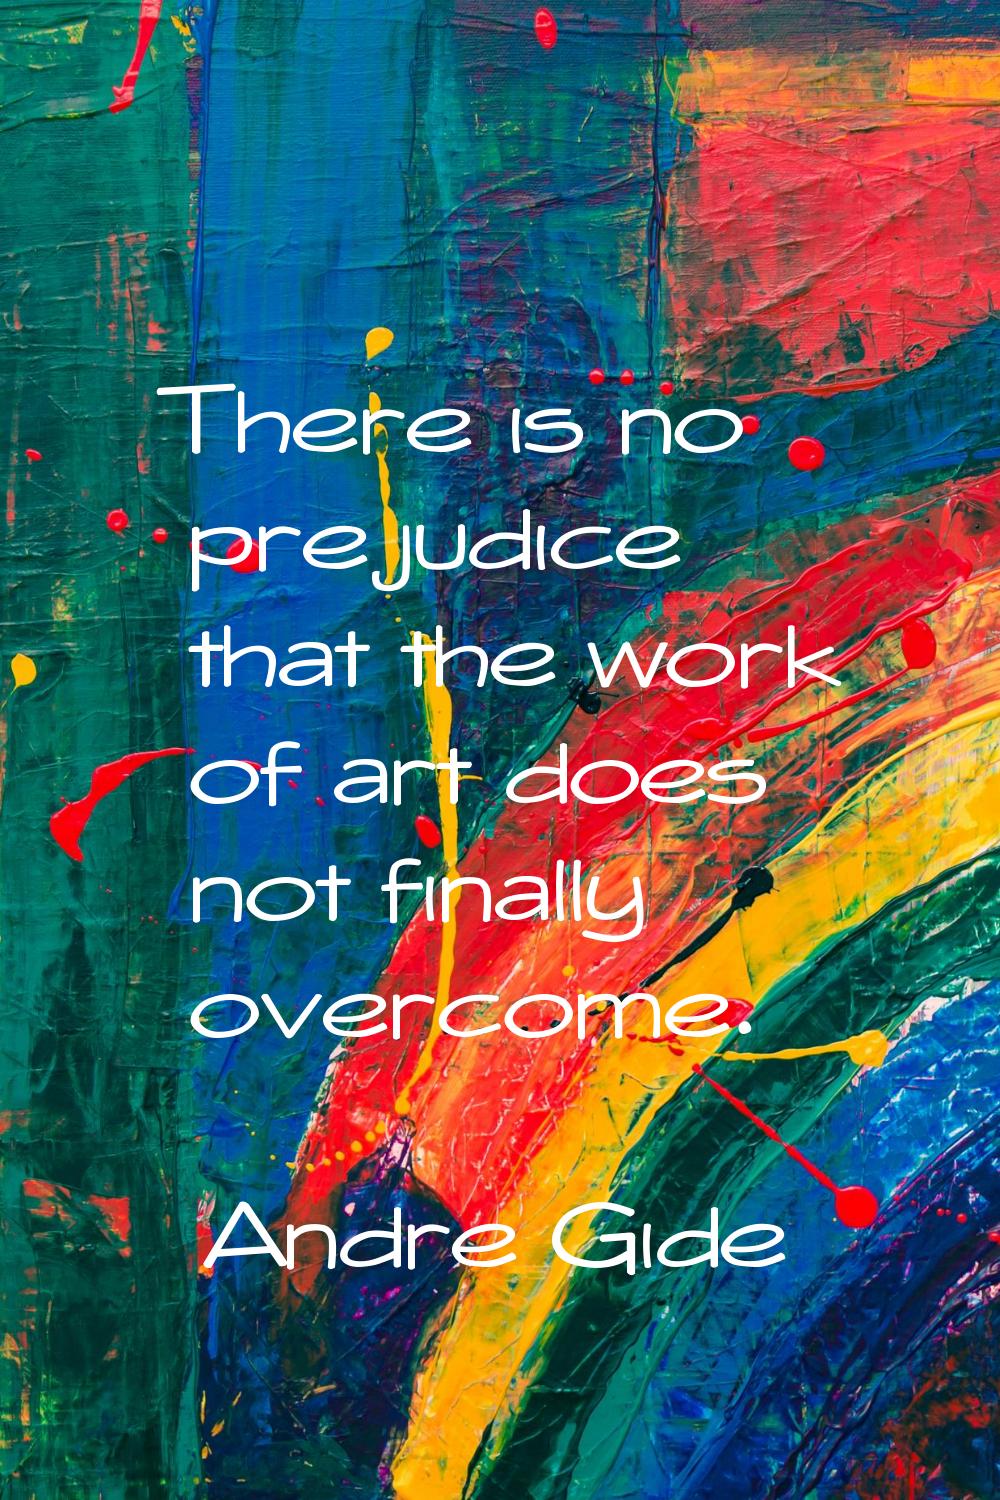 There is no prejudice that the work of art does not finally overcome.